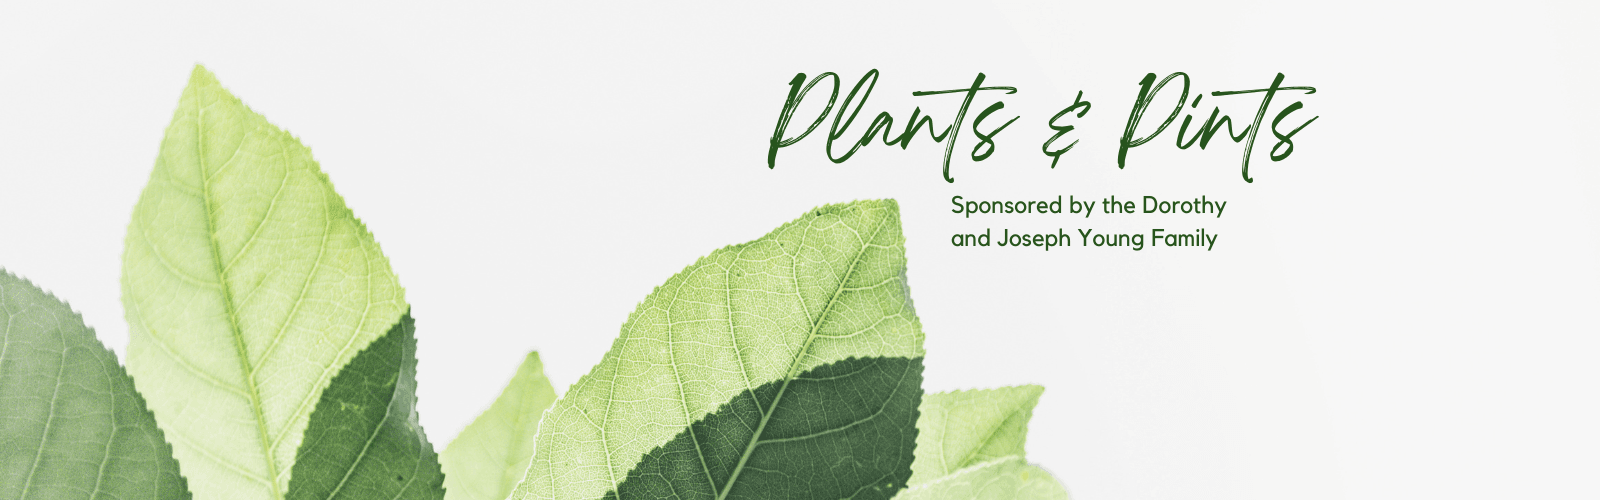 Join Us for Plants & Pints